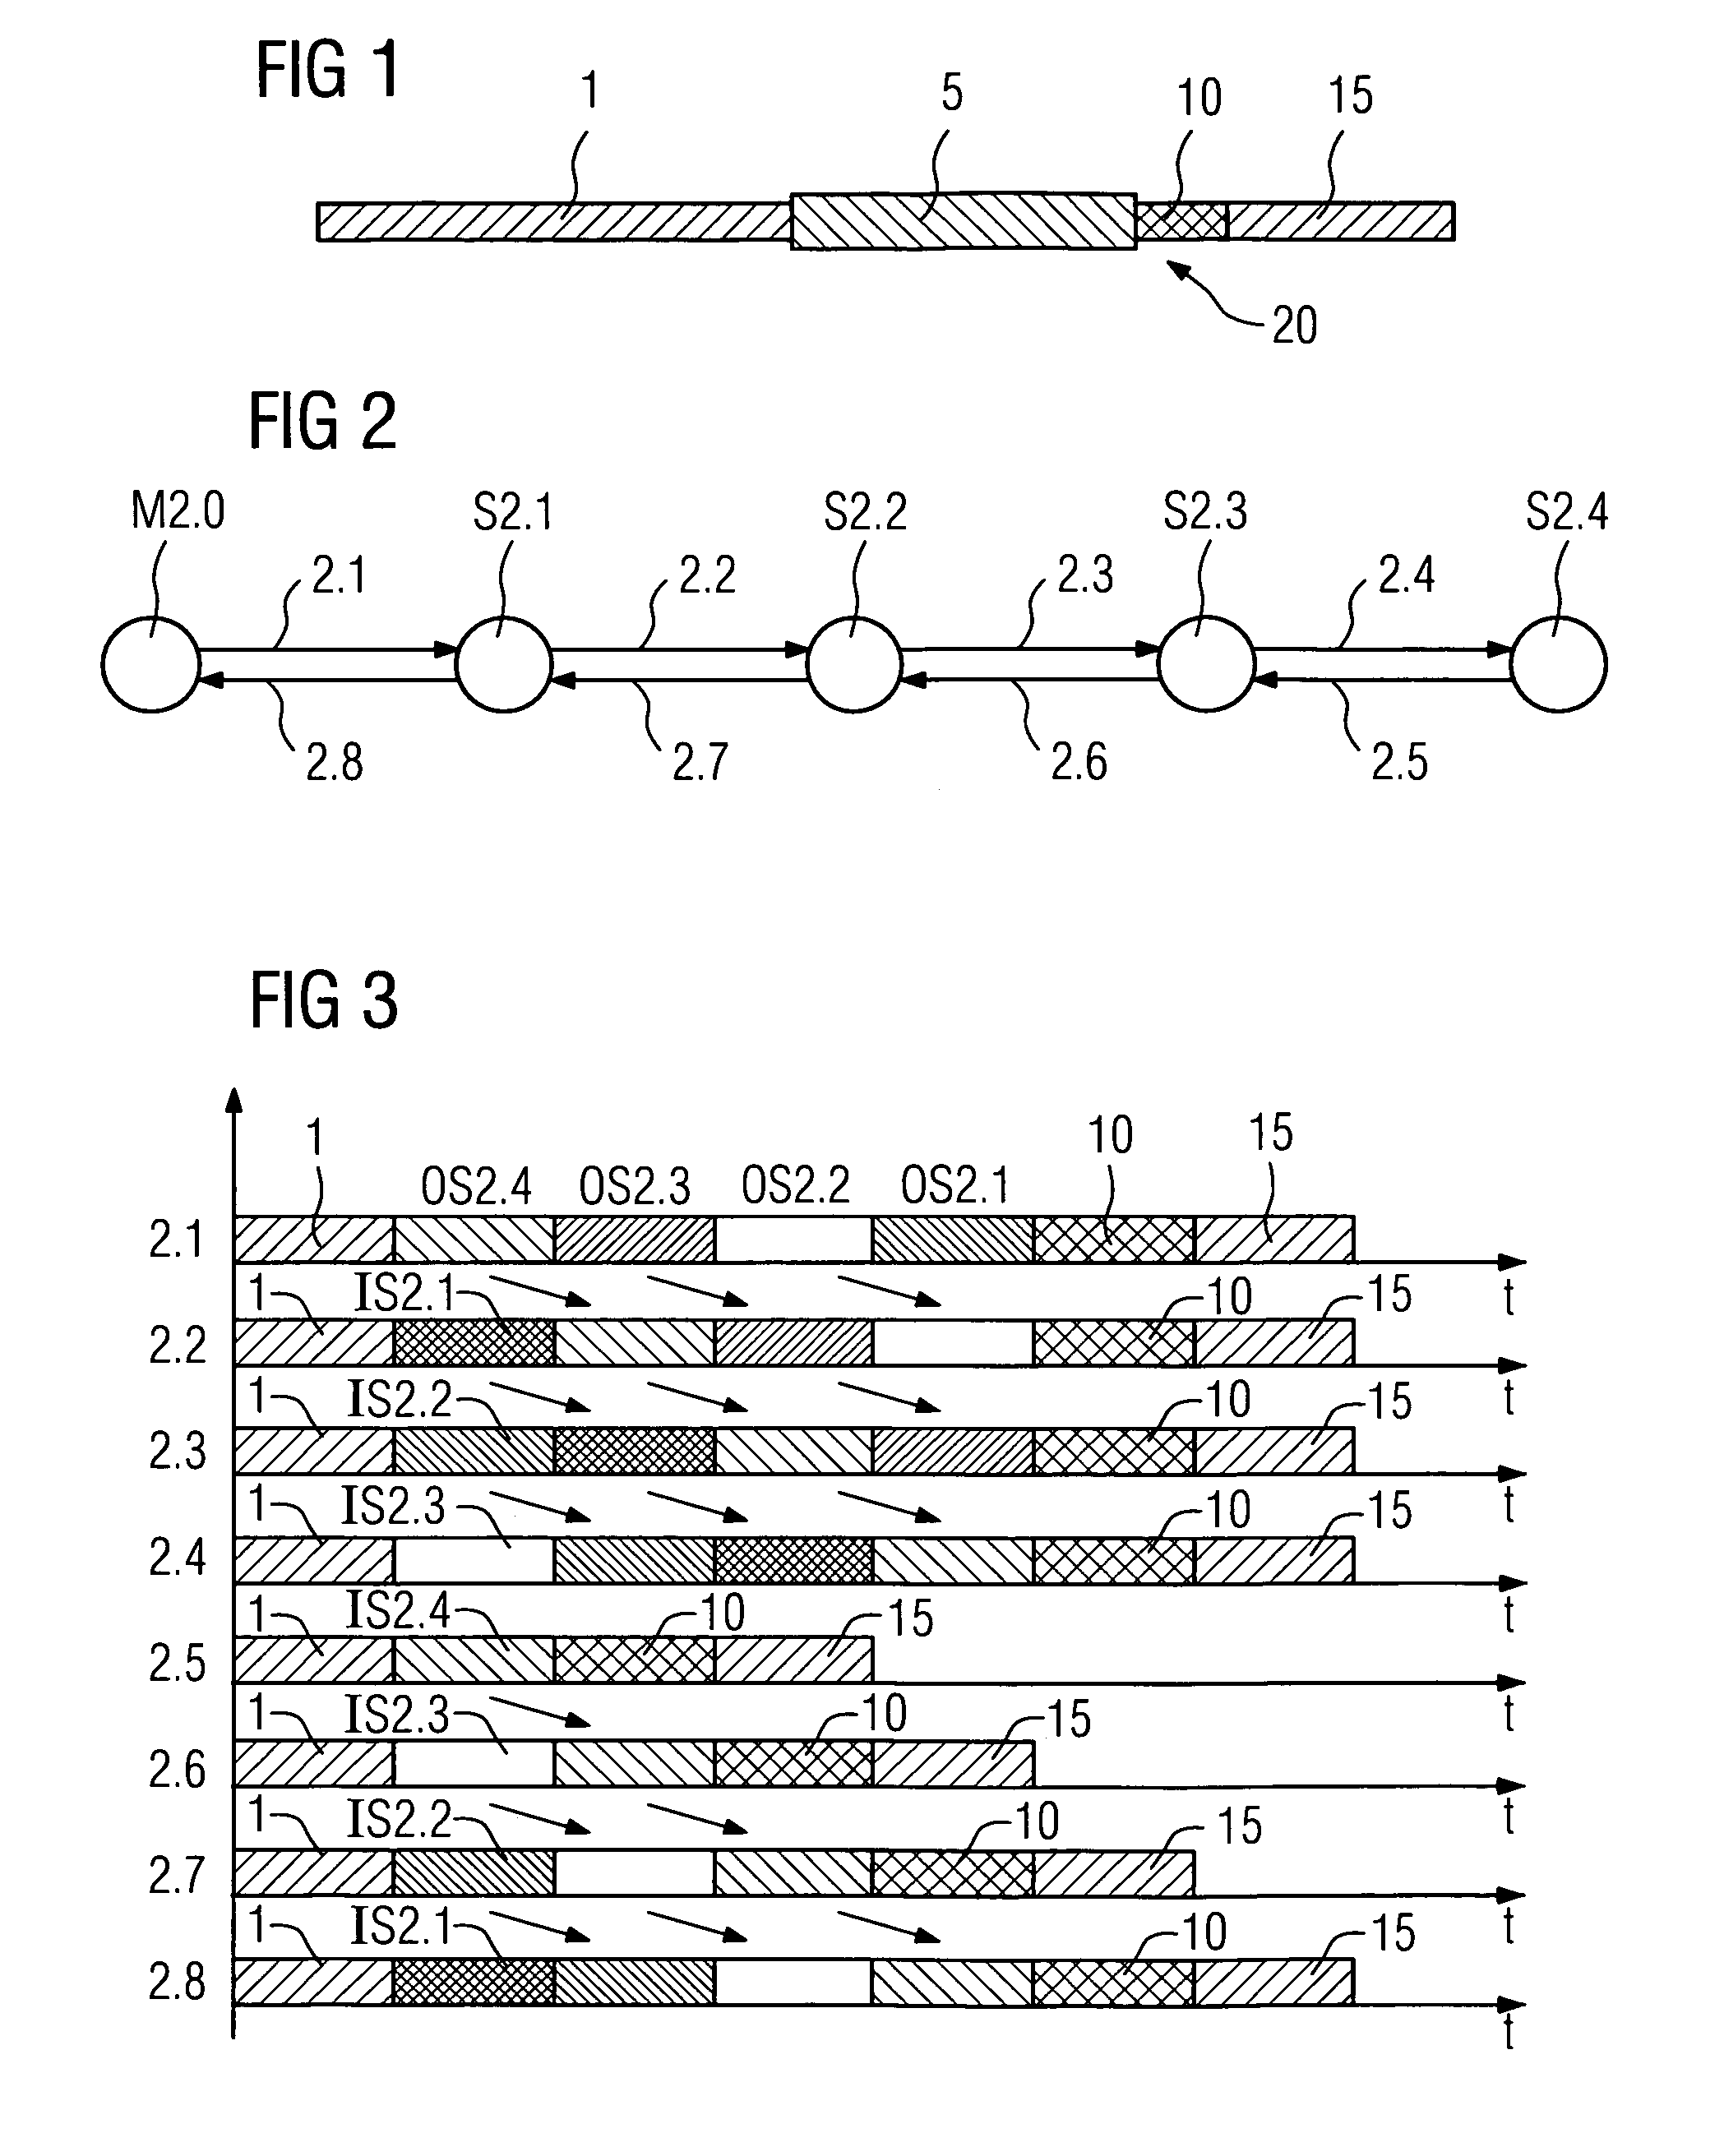 Method for optimizing bandwidth utilization in bus systems